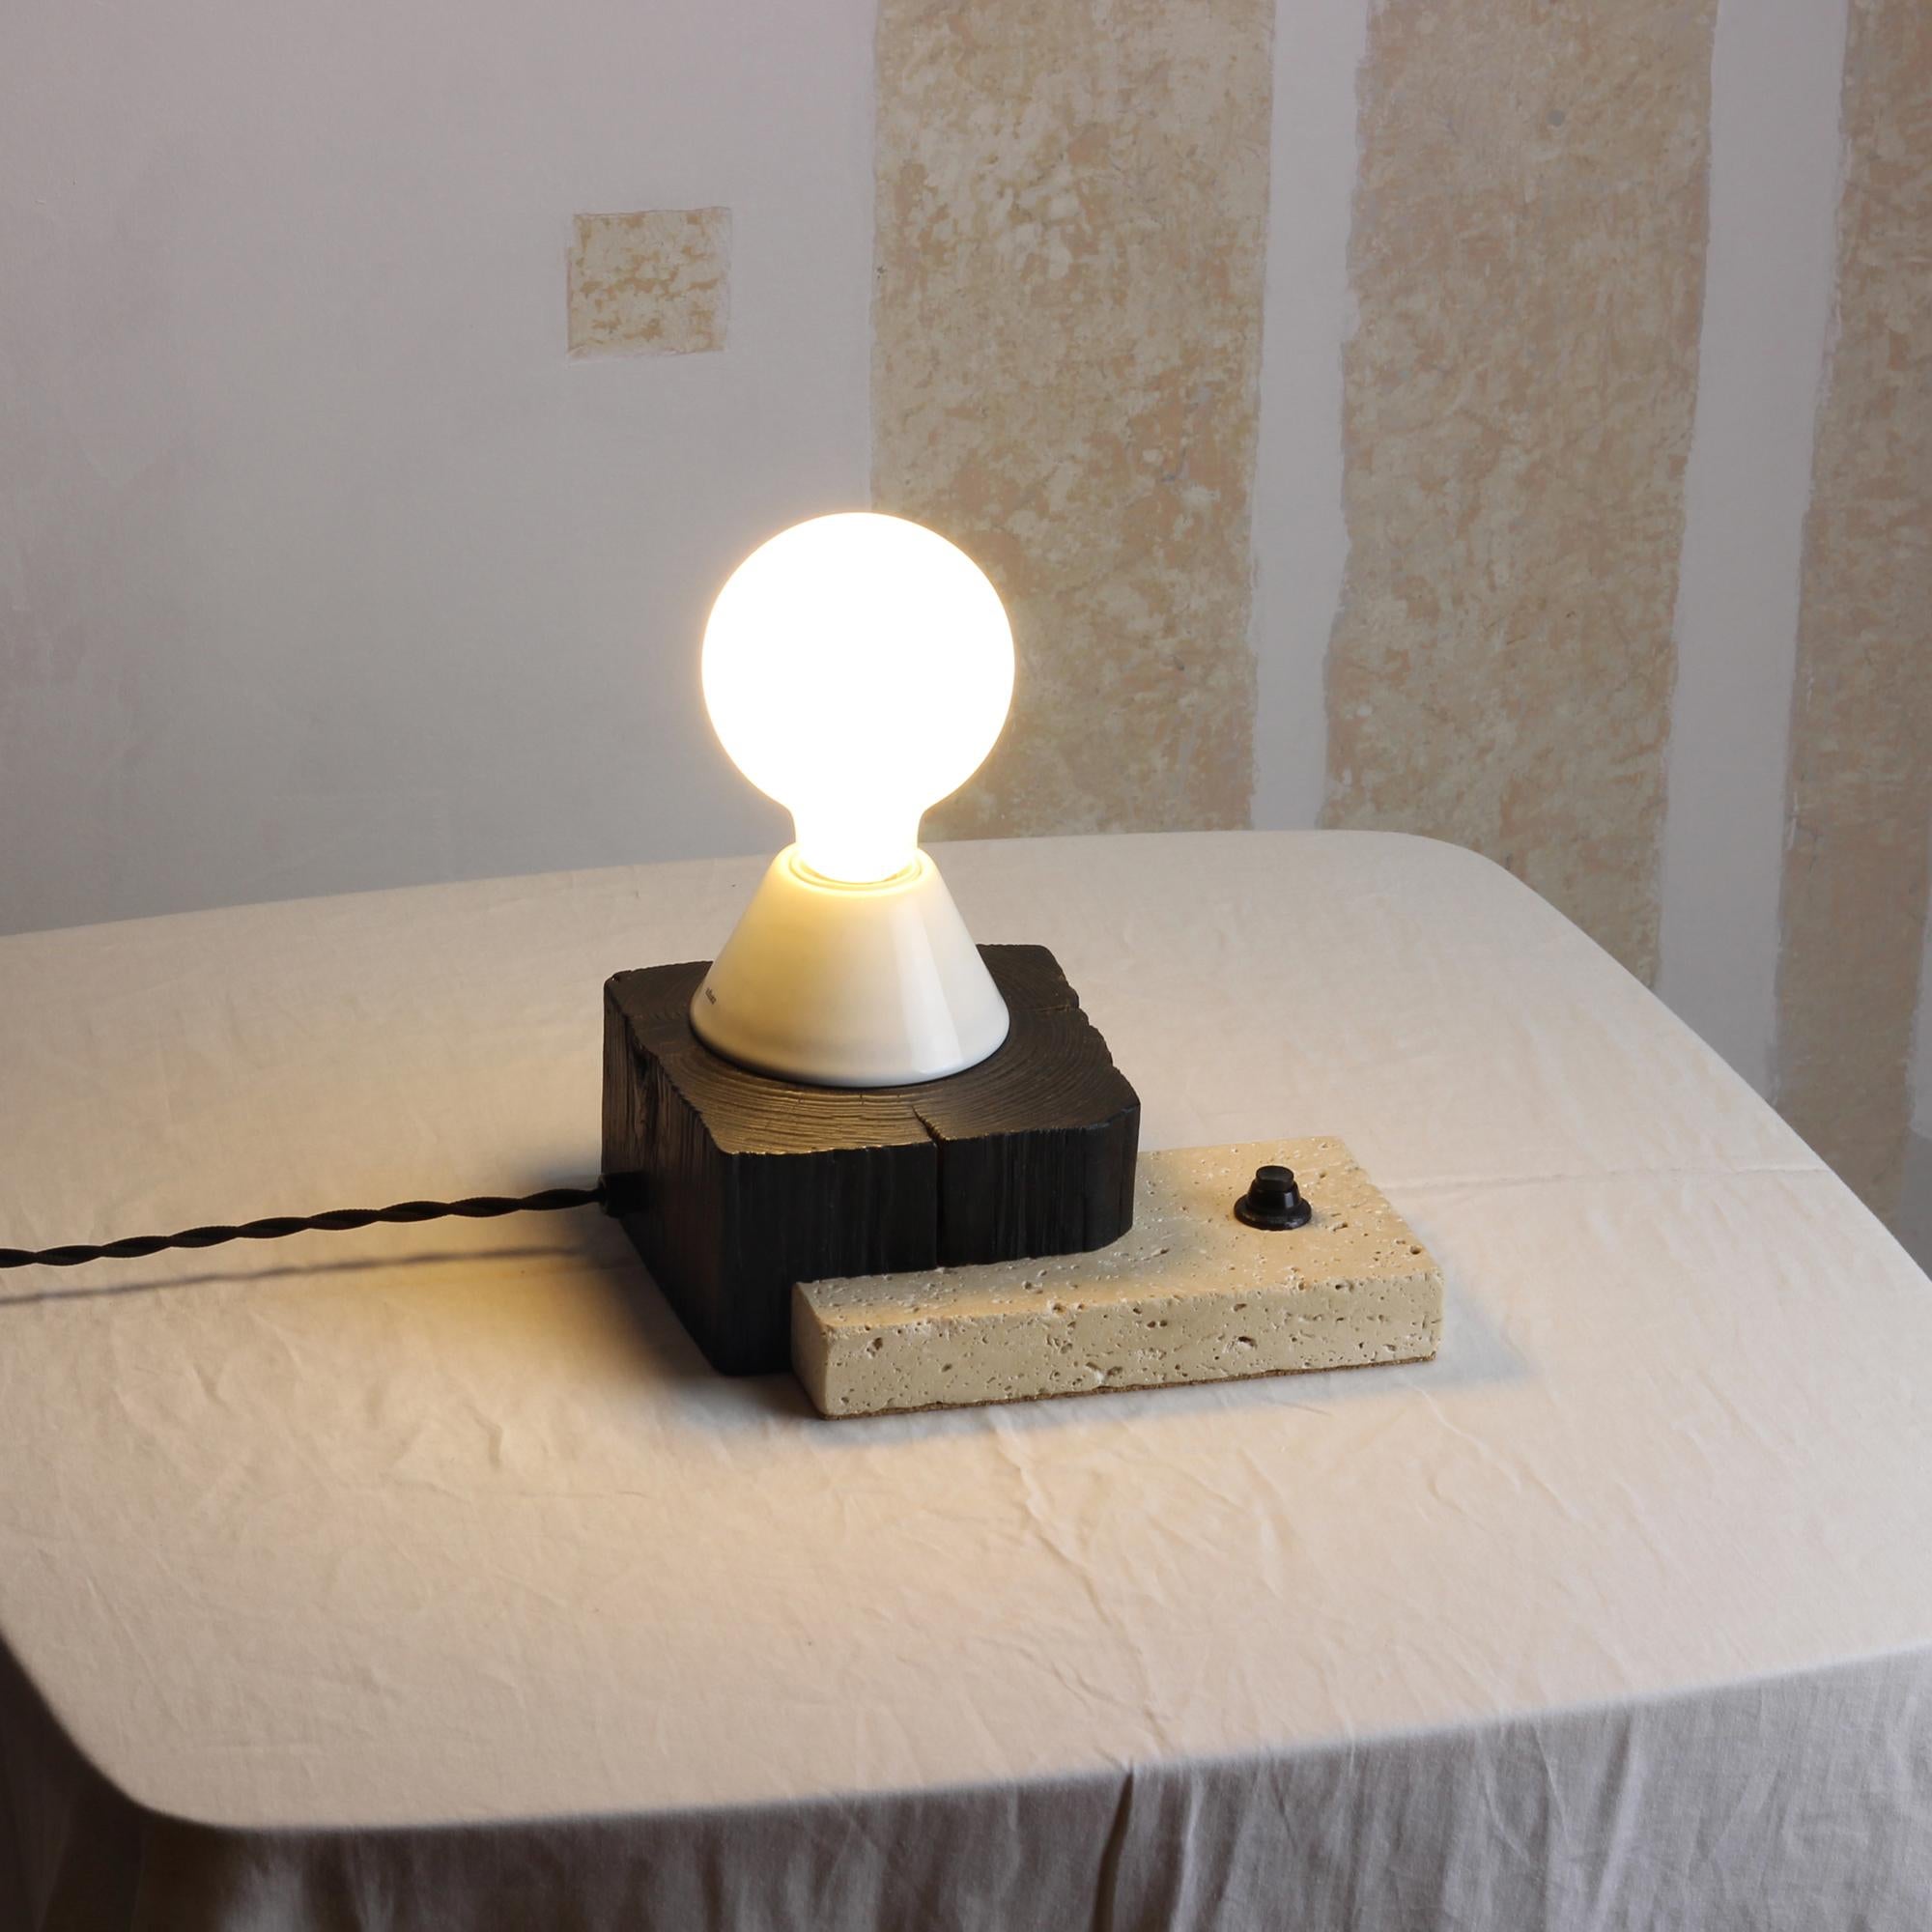 Modern Block, Sculptured Lighting, Table Lamp from Reclaimed Burned Wood and Stone For Sale